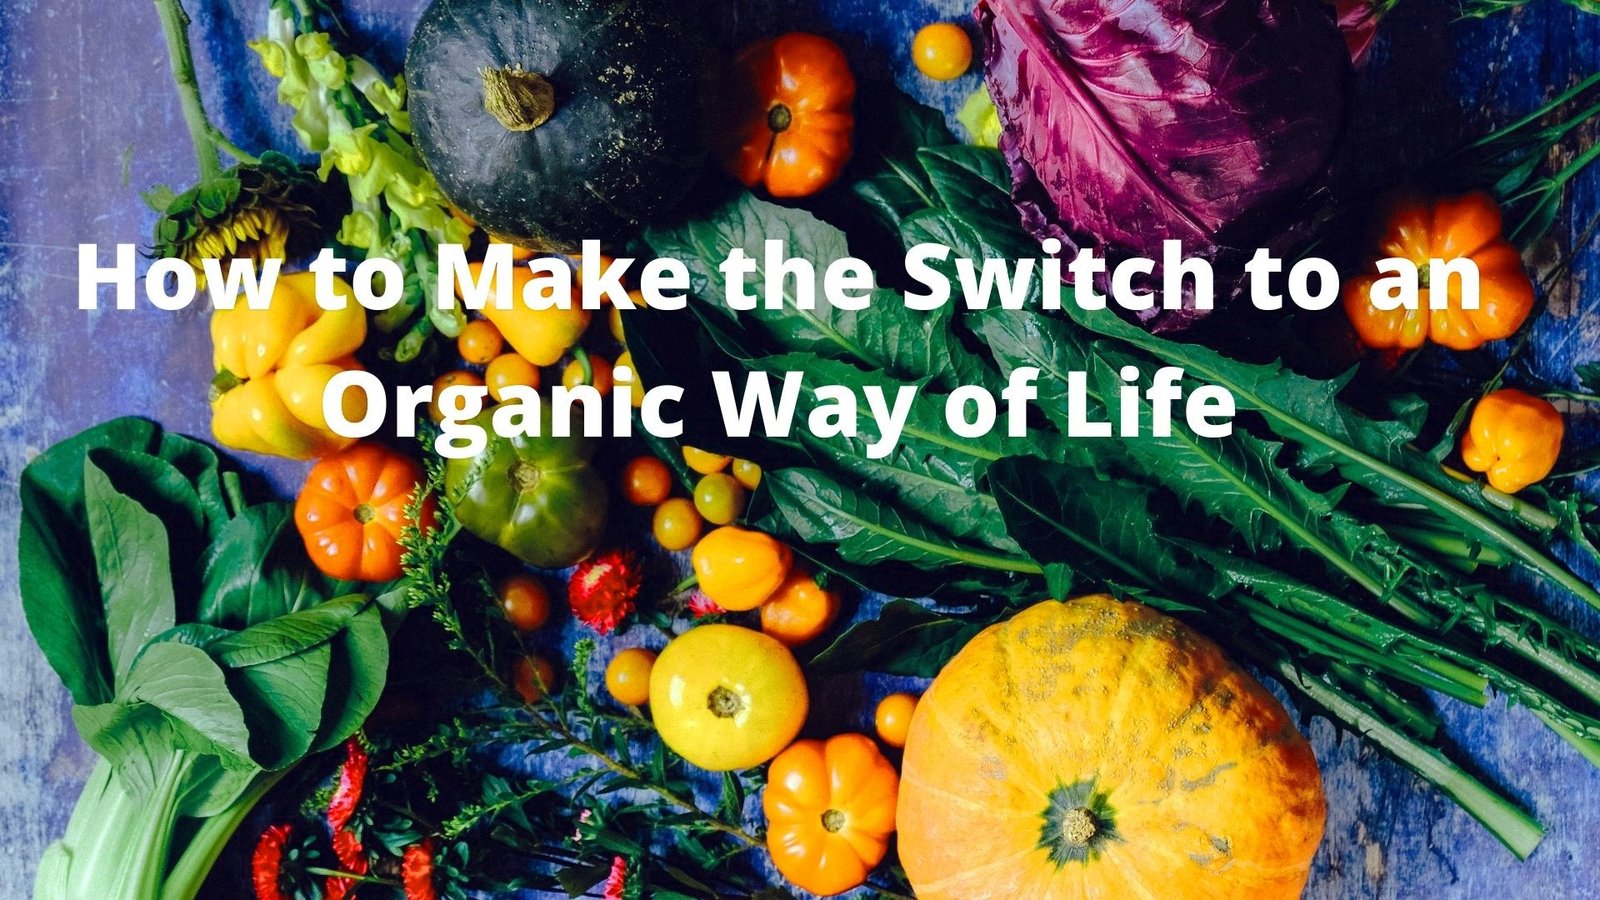 How to Make the Switch to an Organic Way of Life